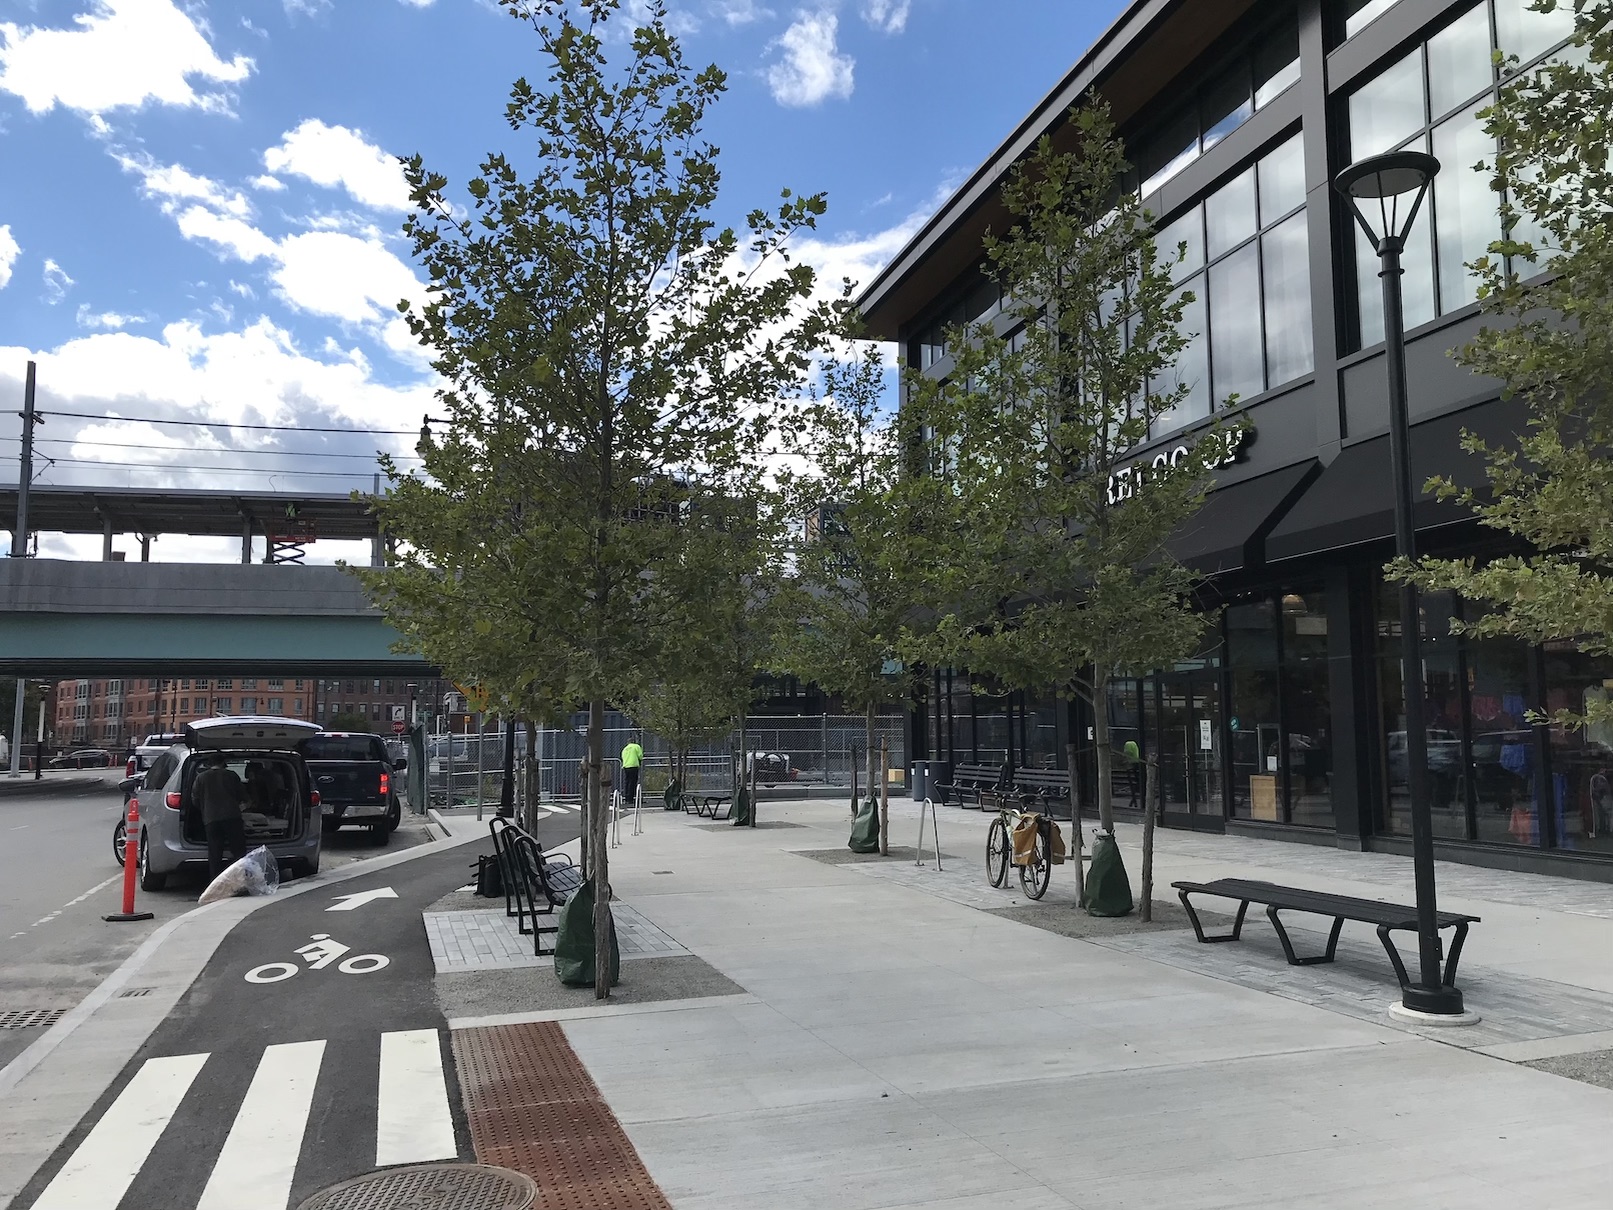 The new REI co-op in Cambridge is right next to the new Lechmere Green Line station (visible in the background of this photo) and the new Community Path.